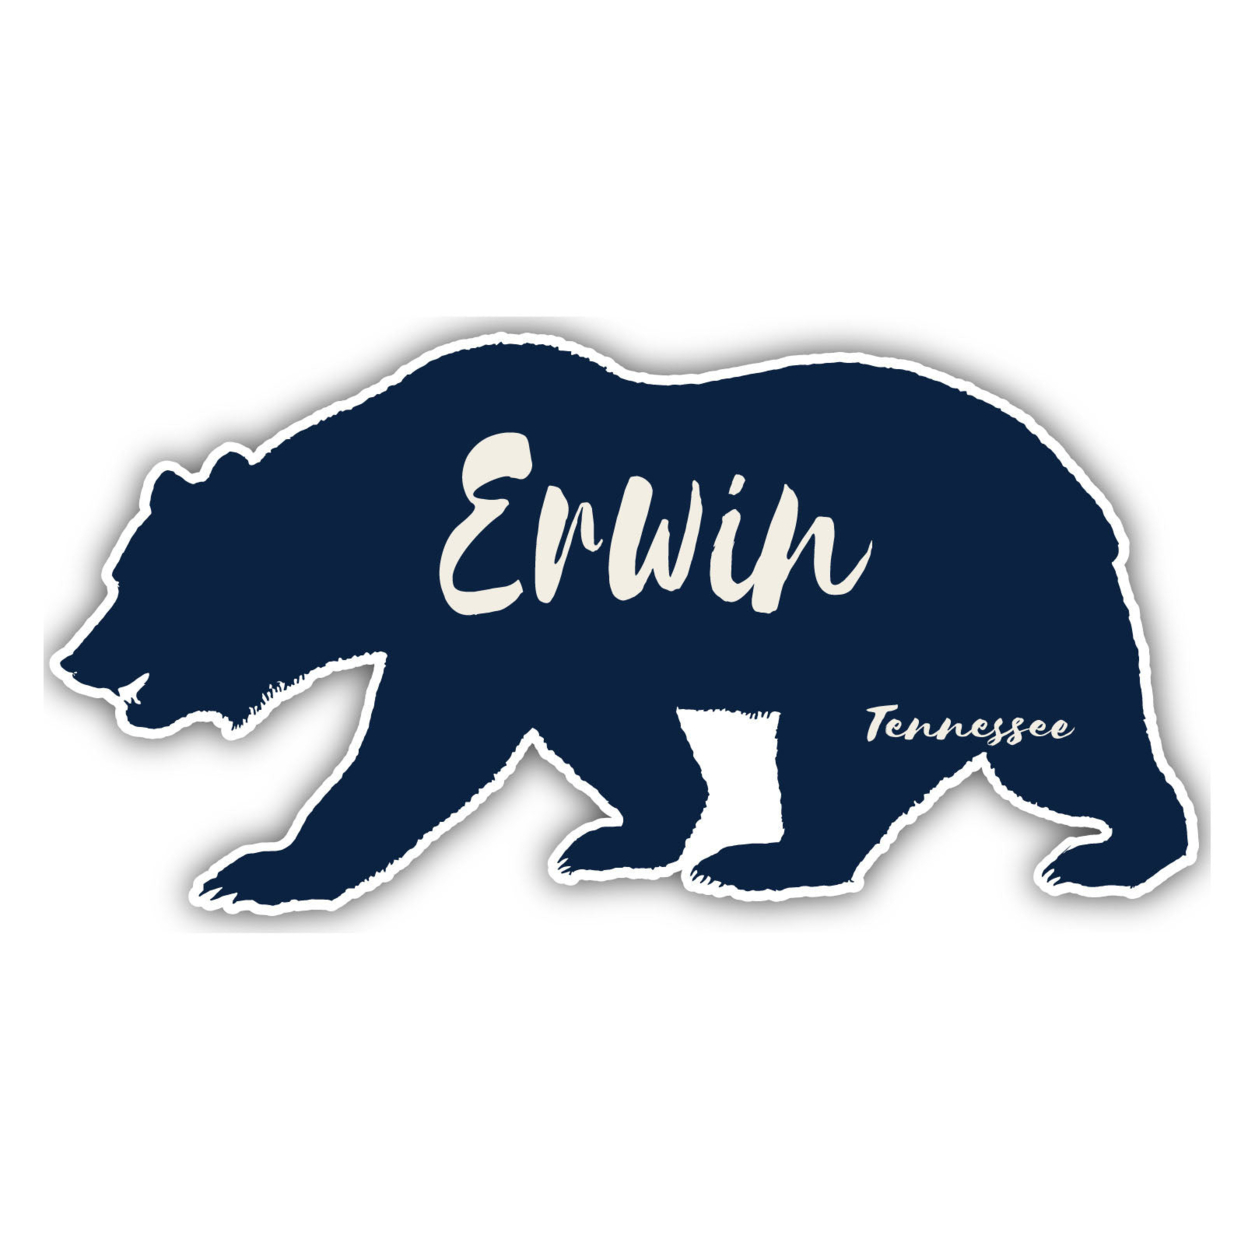 Erwin Tennessee Souvenir Decorative Stickers (Choose Theme And Size) - 4-Pack, 8-Inch, Bear